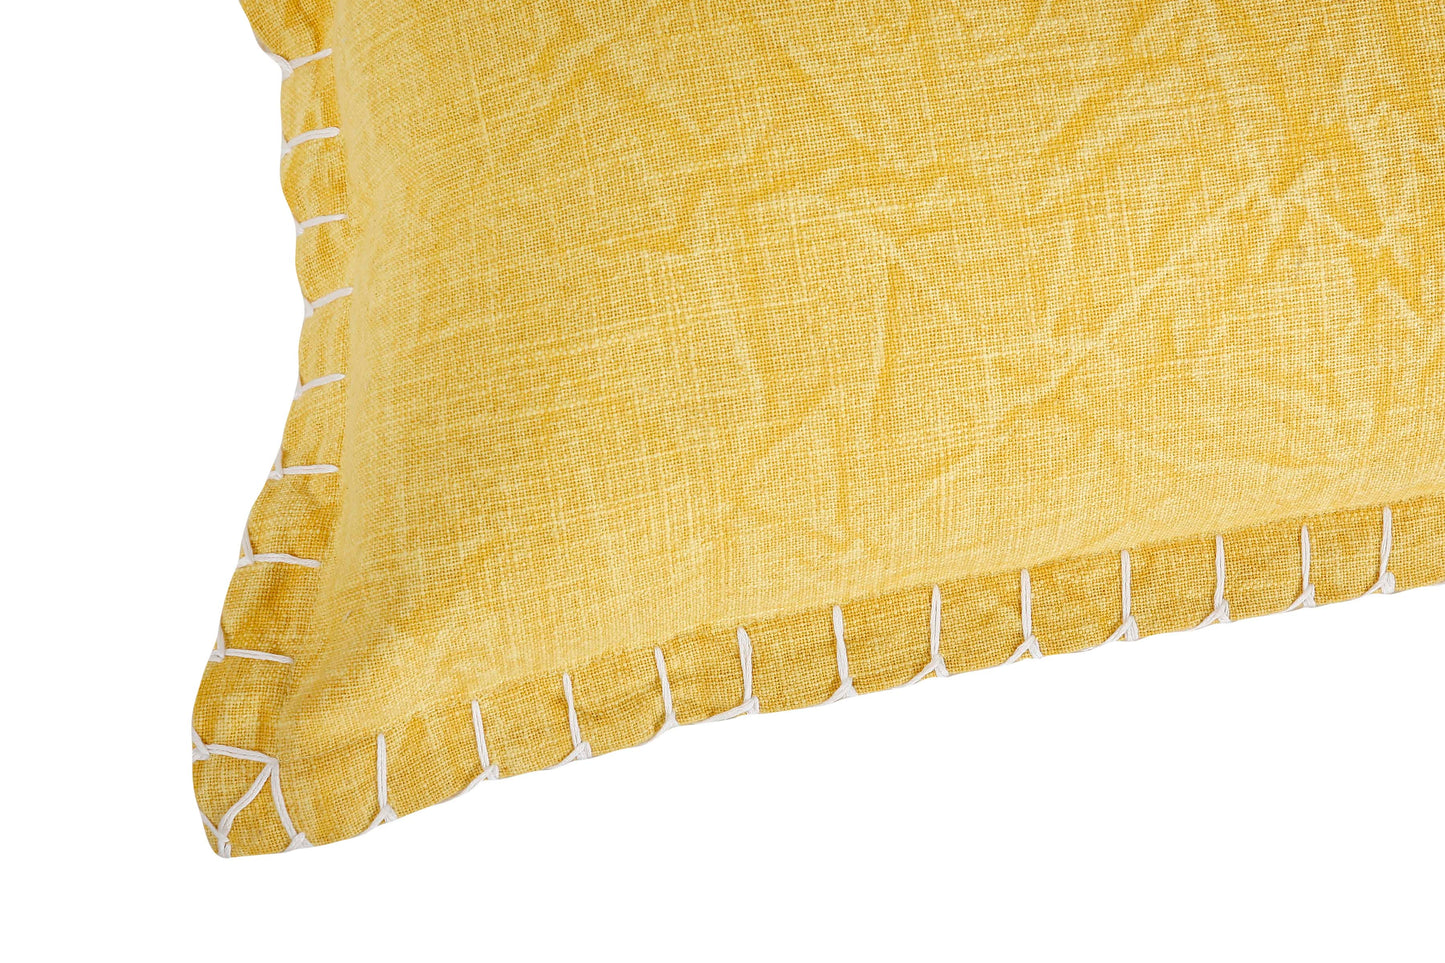 Stone Washed Throw Pillow, Yellow - 21x21 Inch by The Artisen